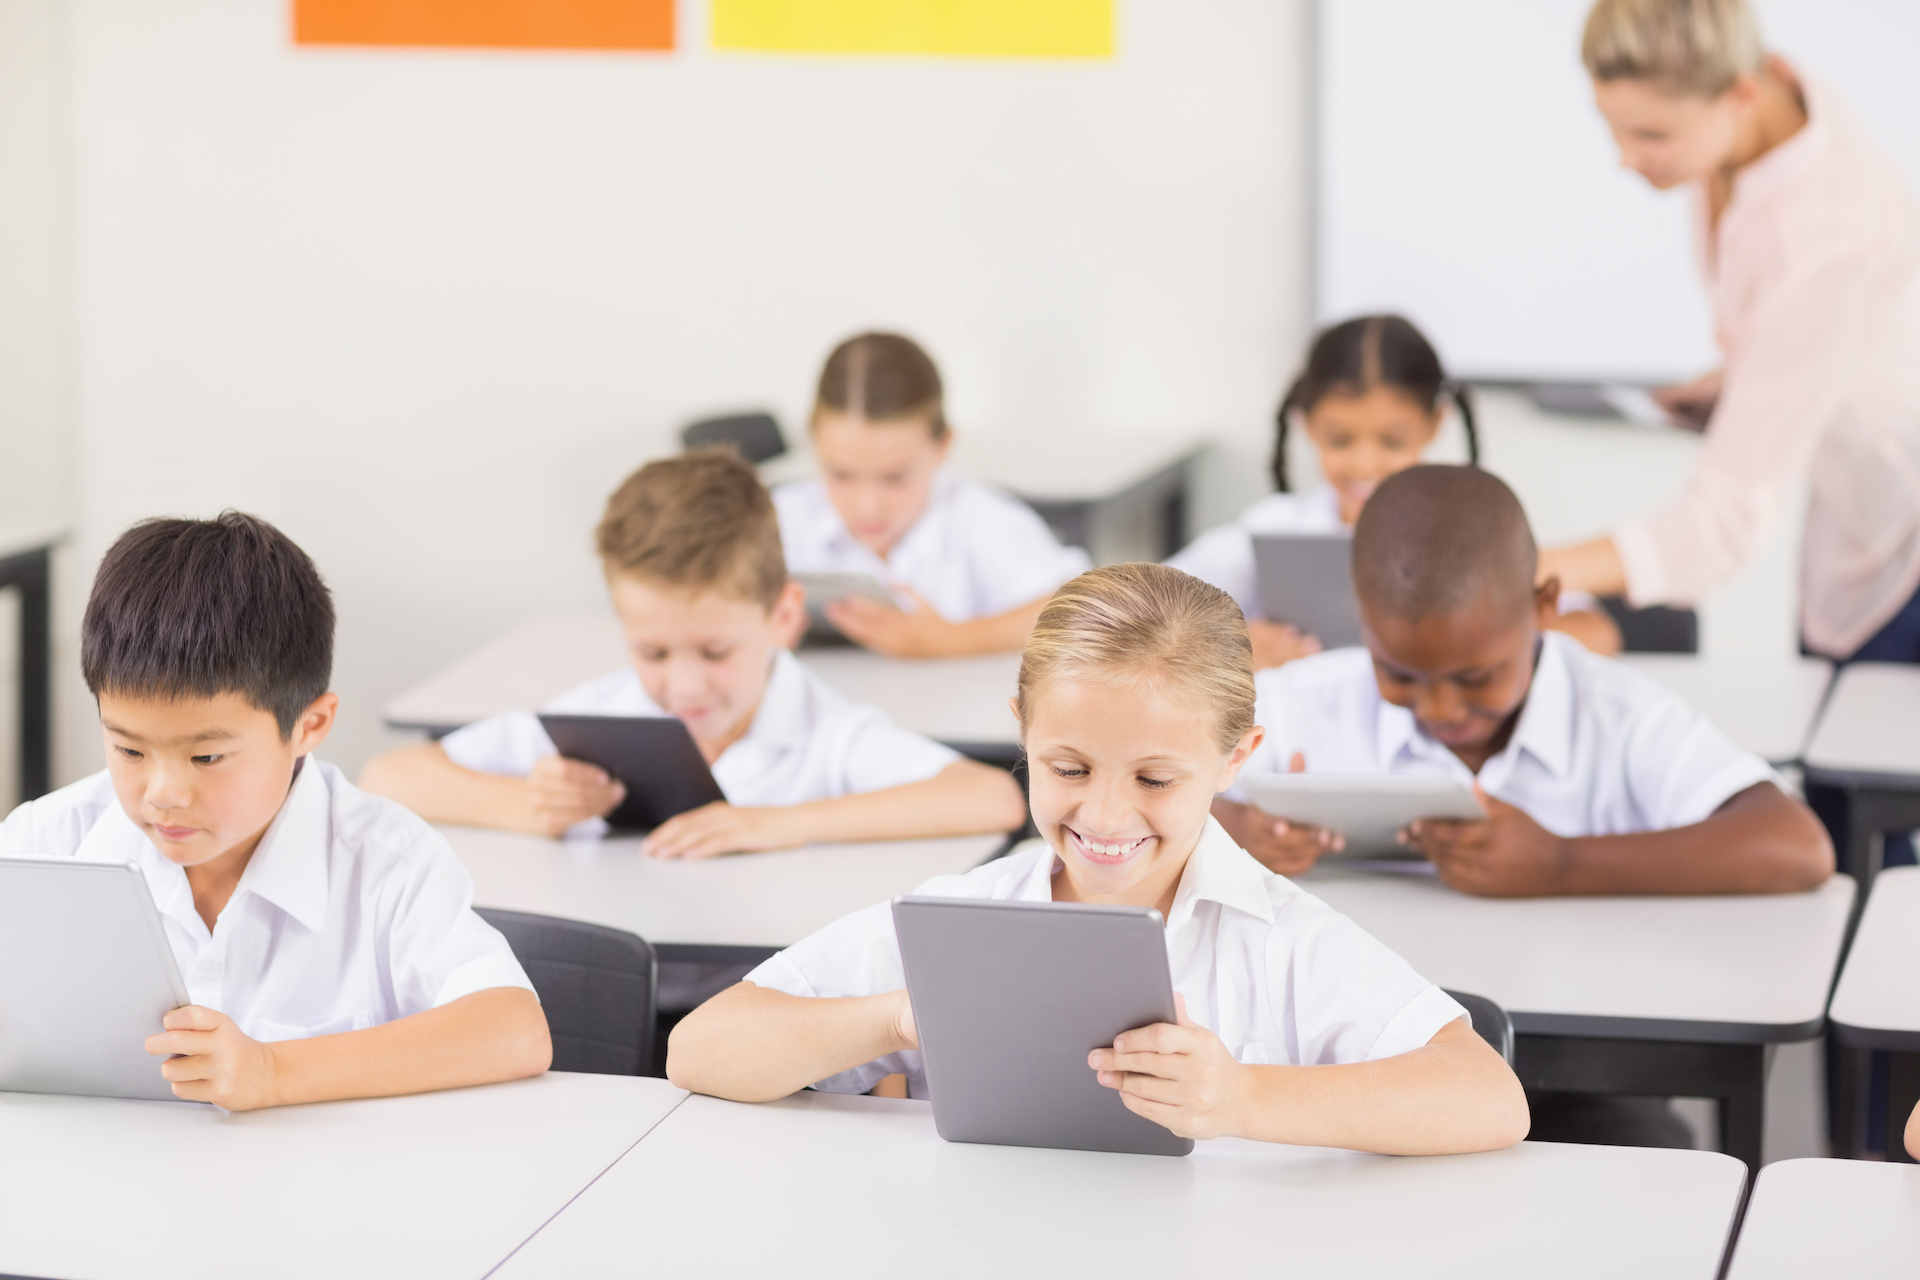 Students using tablet in classroom